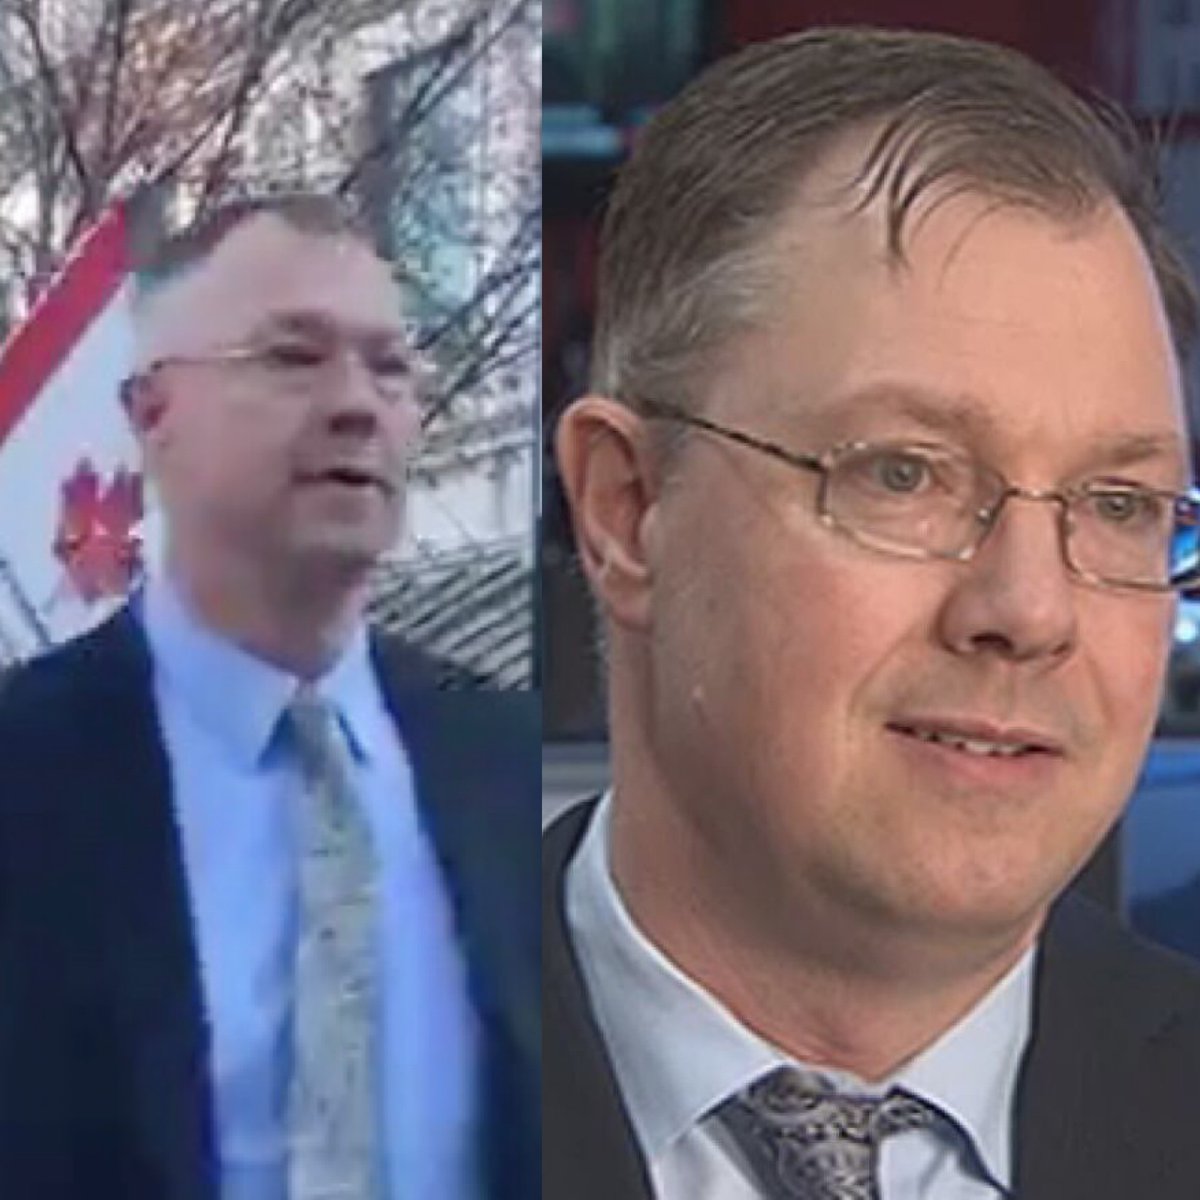 . @robbpettit noticed someone walking past the camera at about 0:10 who appears to be John Carpay. Maybe Carpay knows who’s helping to finance this operation? #ableg  #covidiots  #spreadnecks